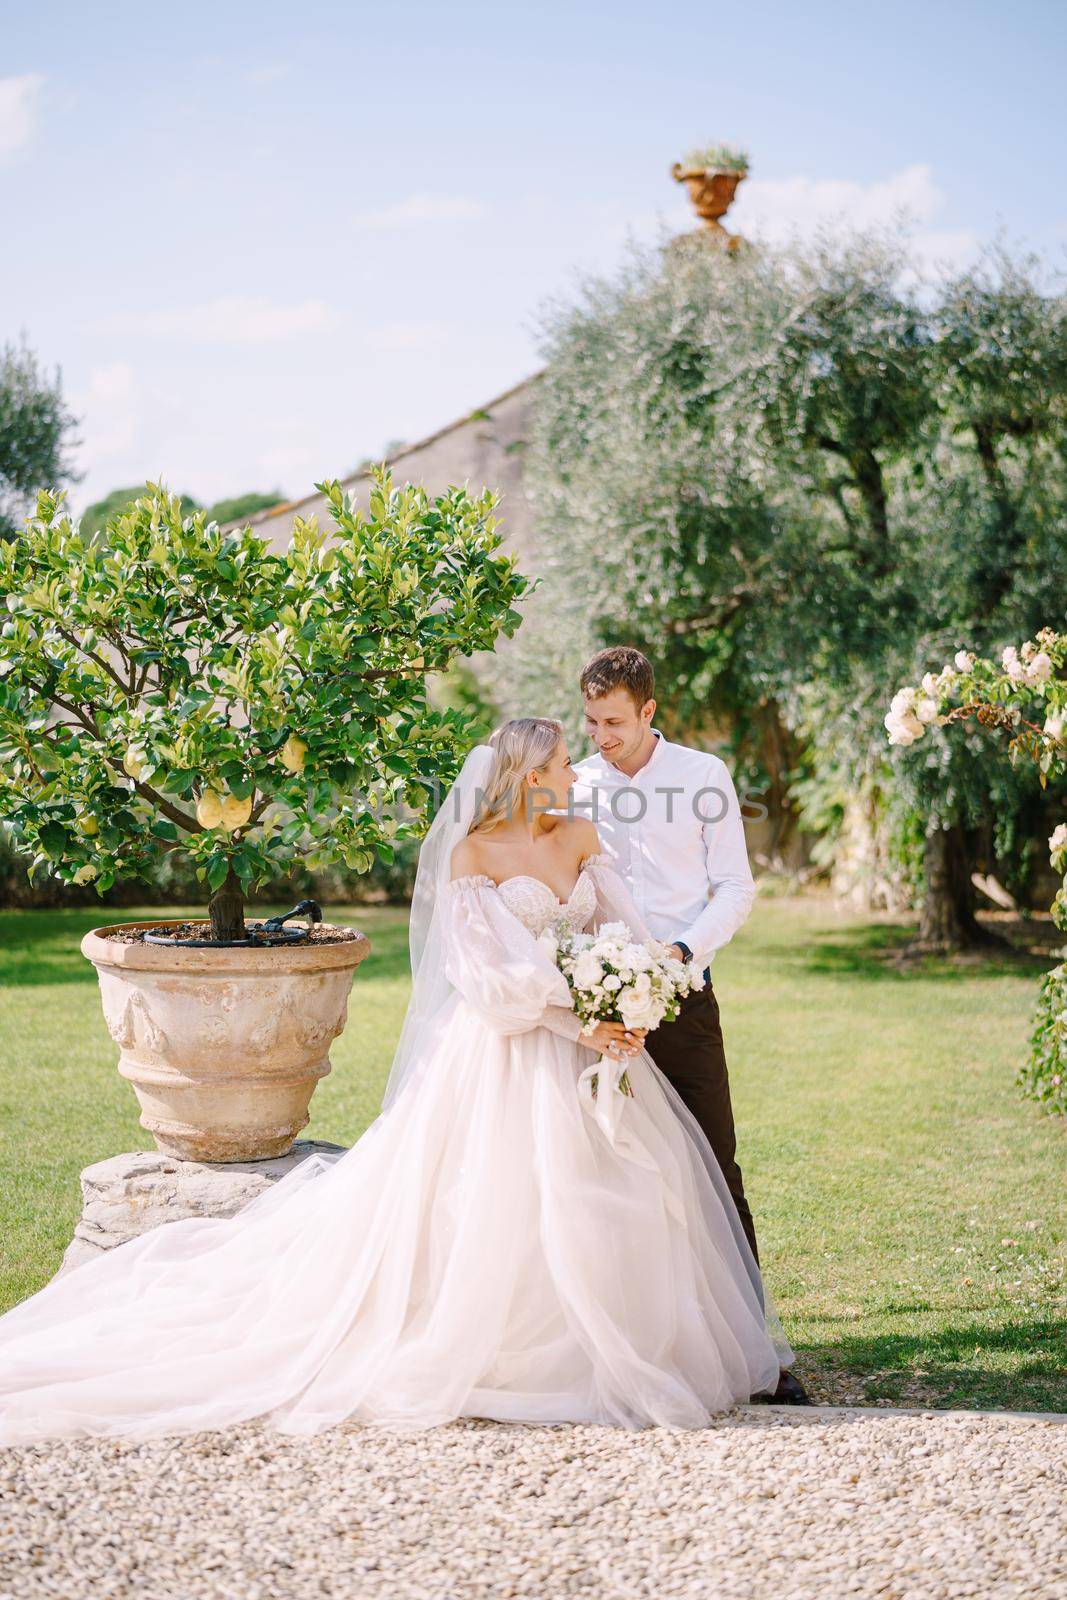 Wedding in Florence, Italy, in an old villa-winery. Wedding couple in the garden. The groom hugs the bride near the lemon trees.